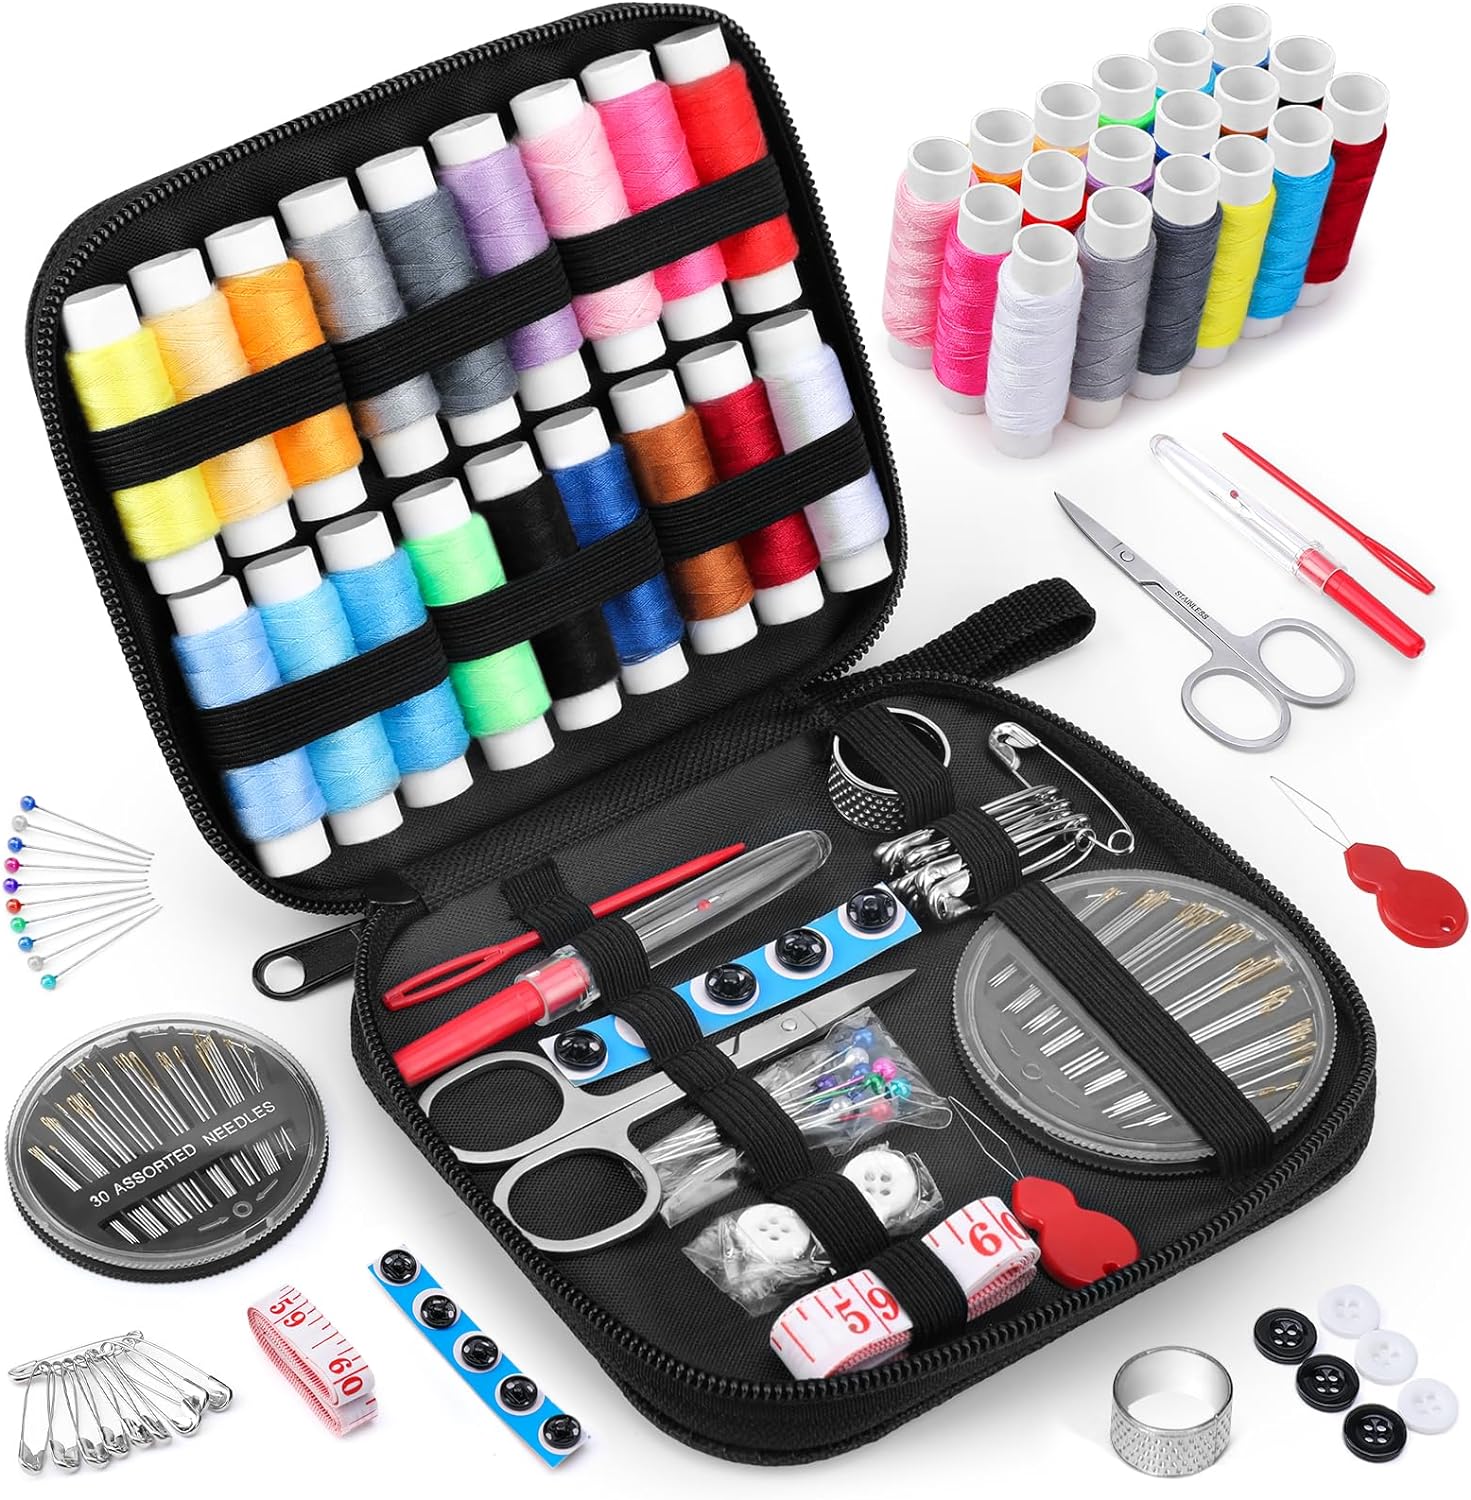 Sewing Kit For Adults And Kids, Portable Sewing Tool Box With